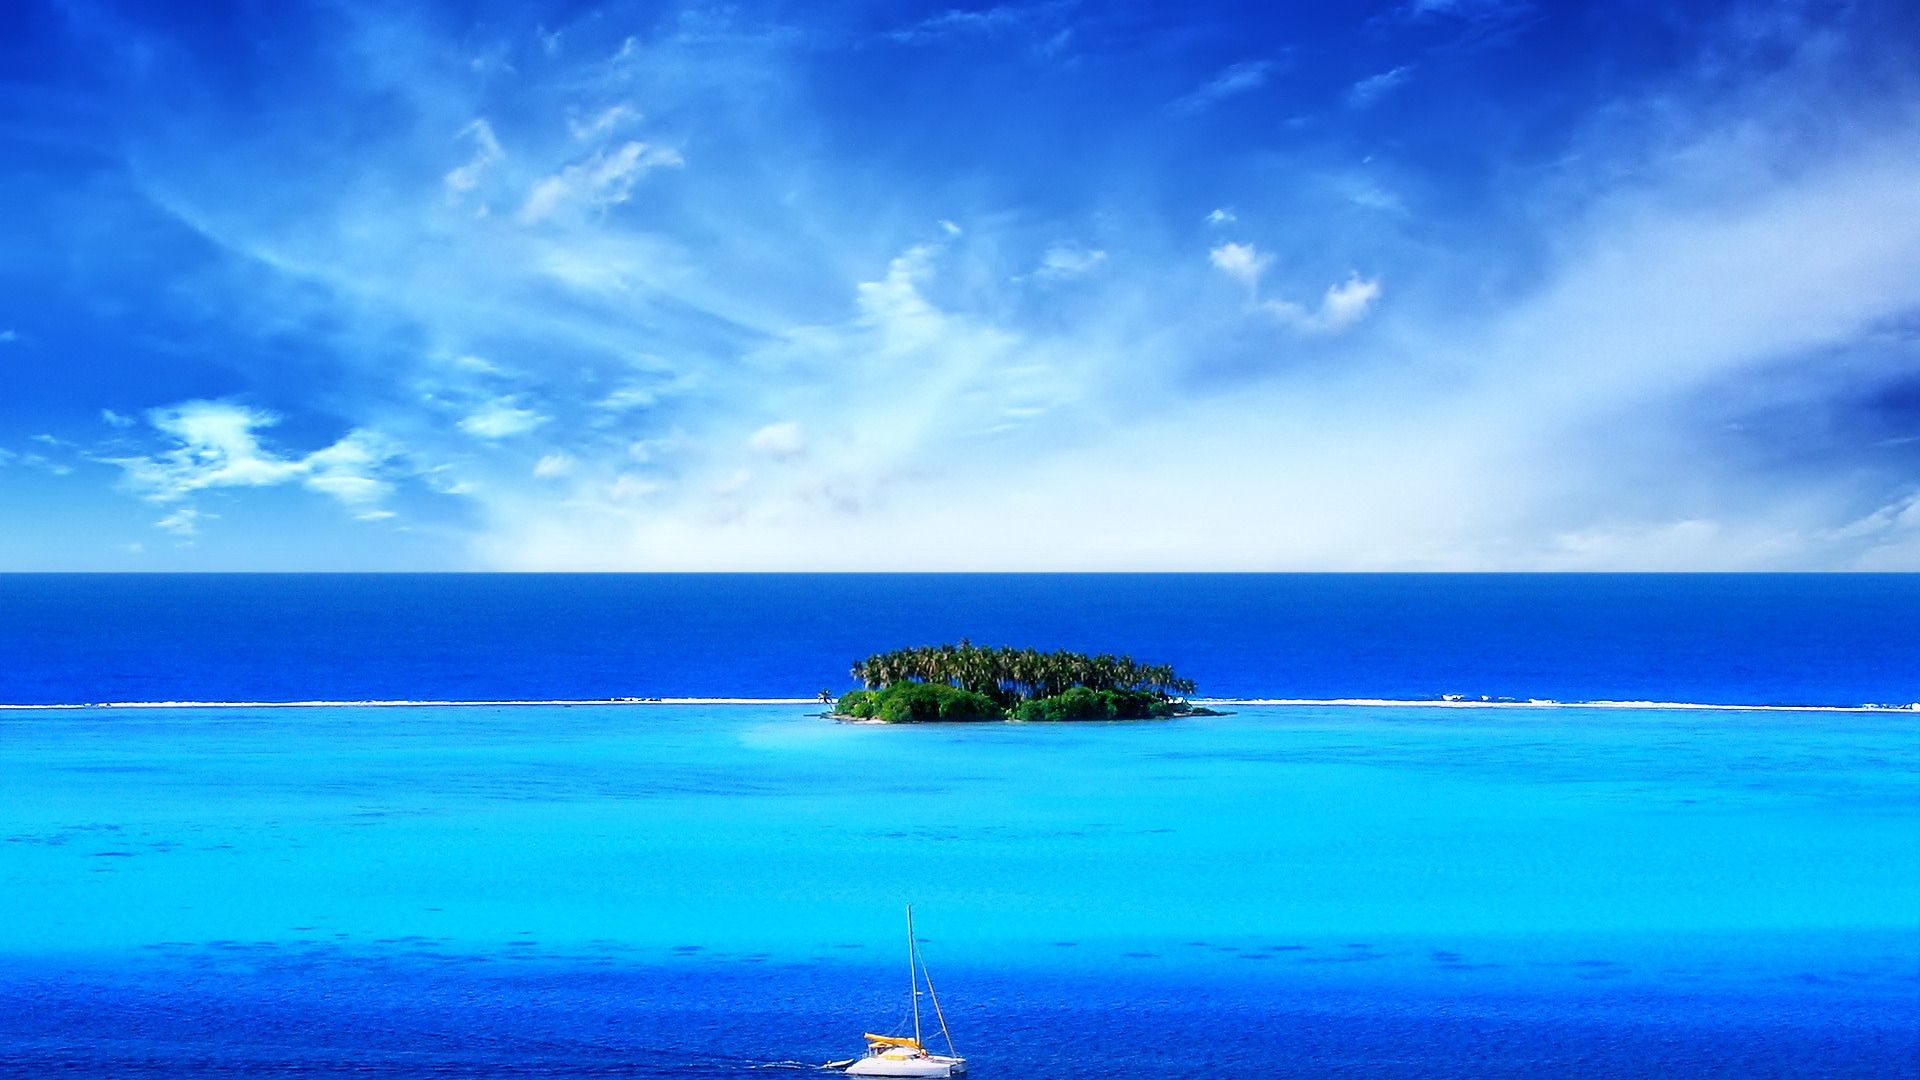 The Wallpapers Hd 1920x1080 Sea 